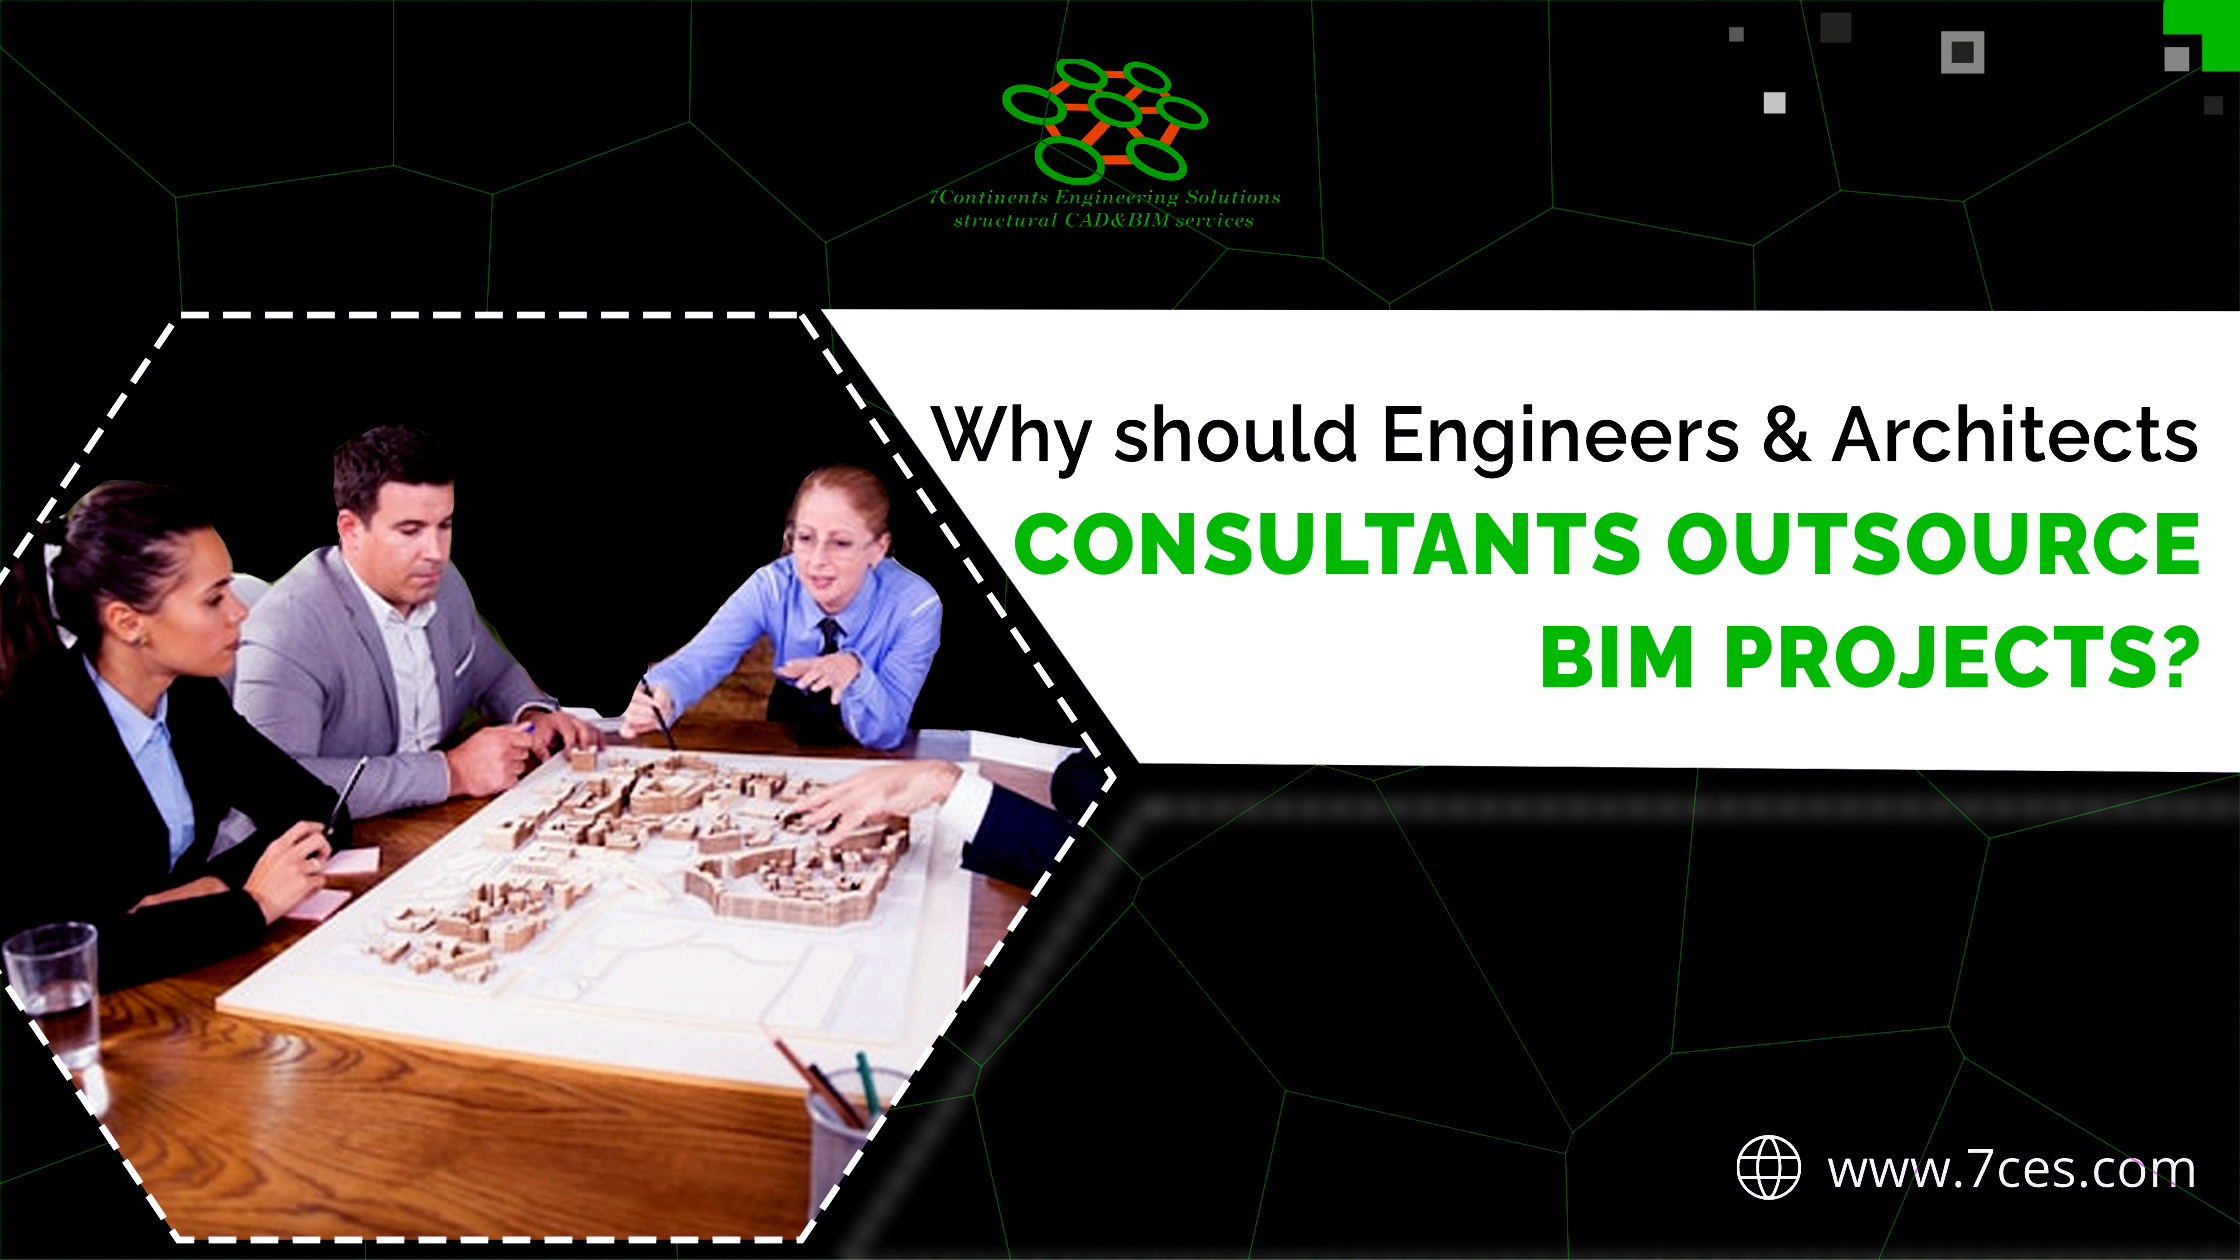 Why should Engineers & Architects Consultants outsource BIM Projects? | 7CES